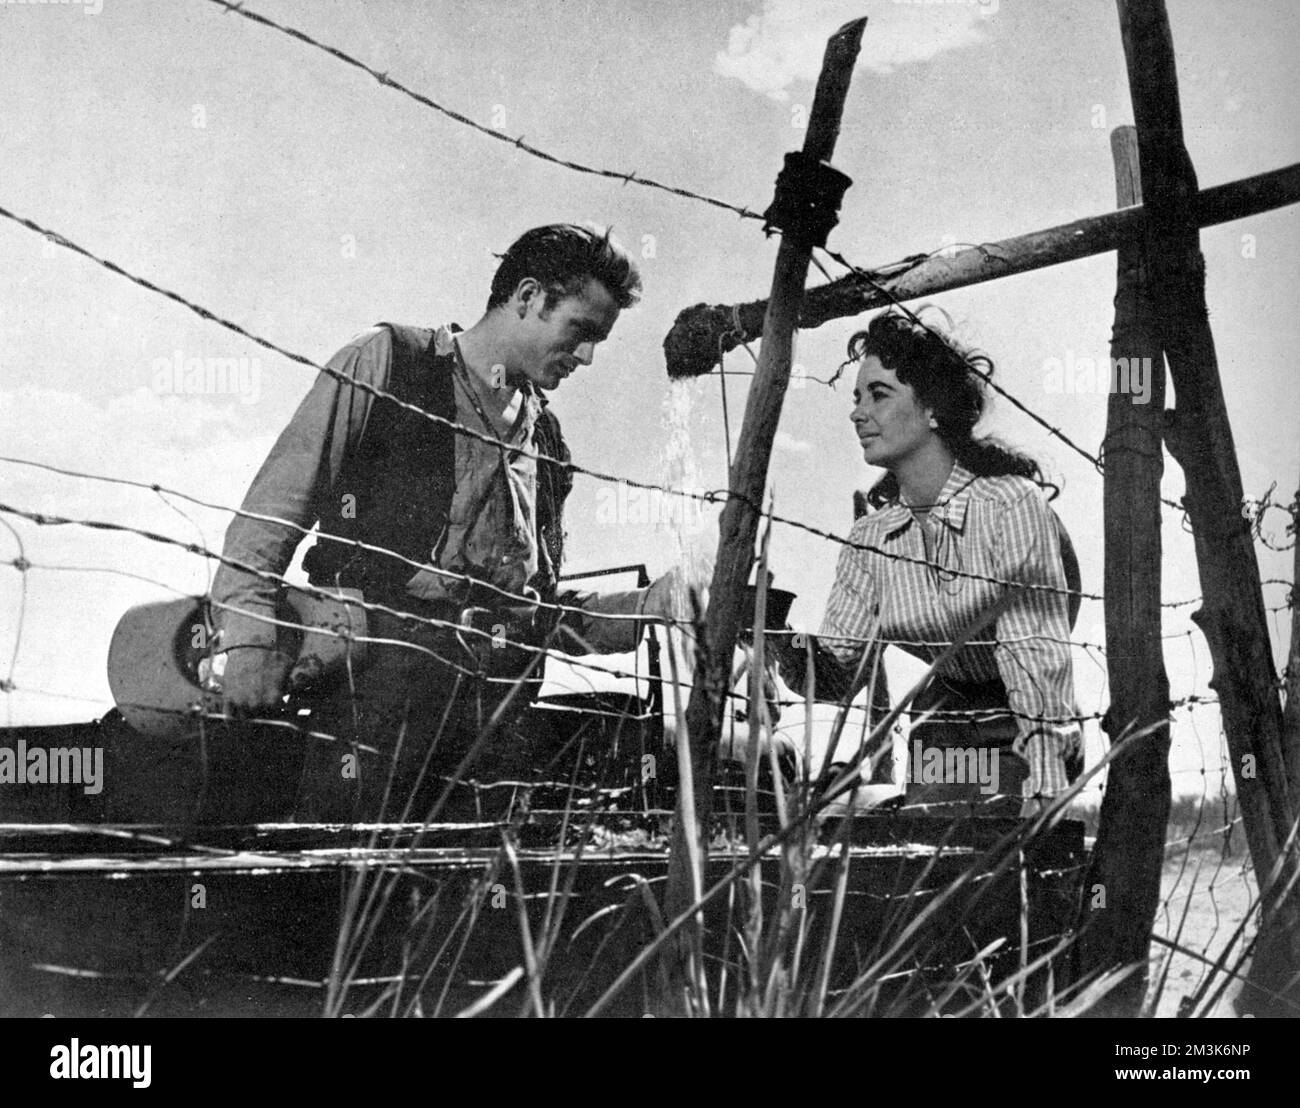 A film still of James Dean and Elizabeth Taylor in 'Giant.' This was the final film James Dean appeared in before his death.     Date: 19th December 1956, p700 Stock Photo